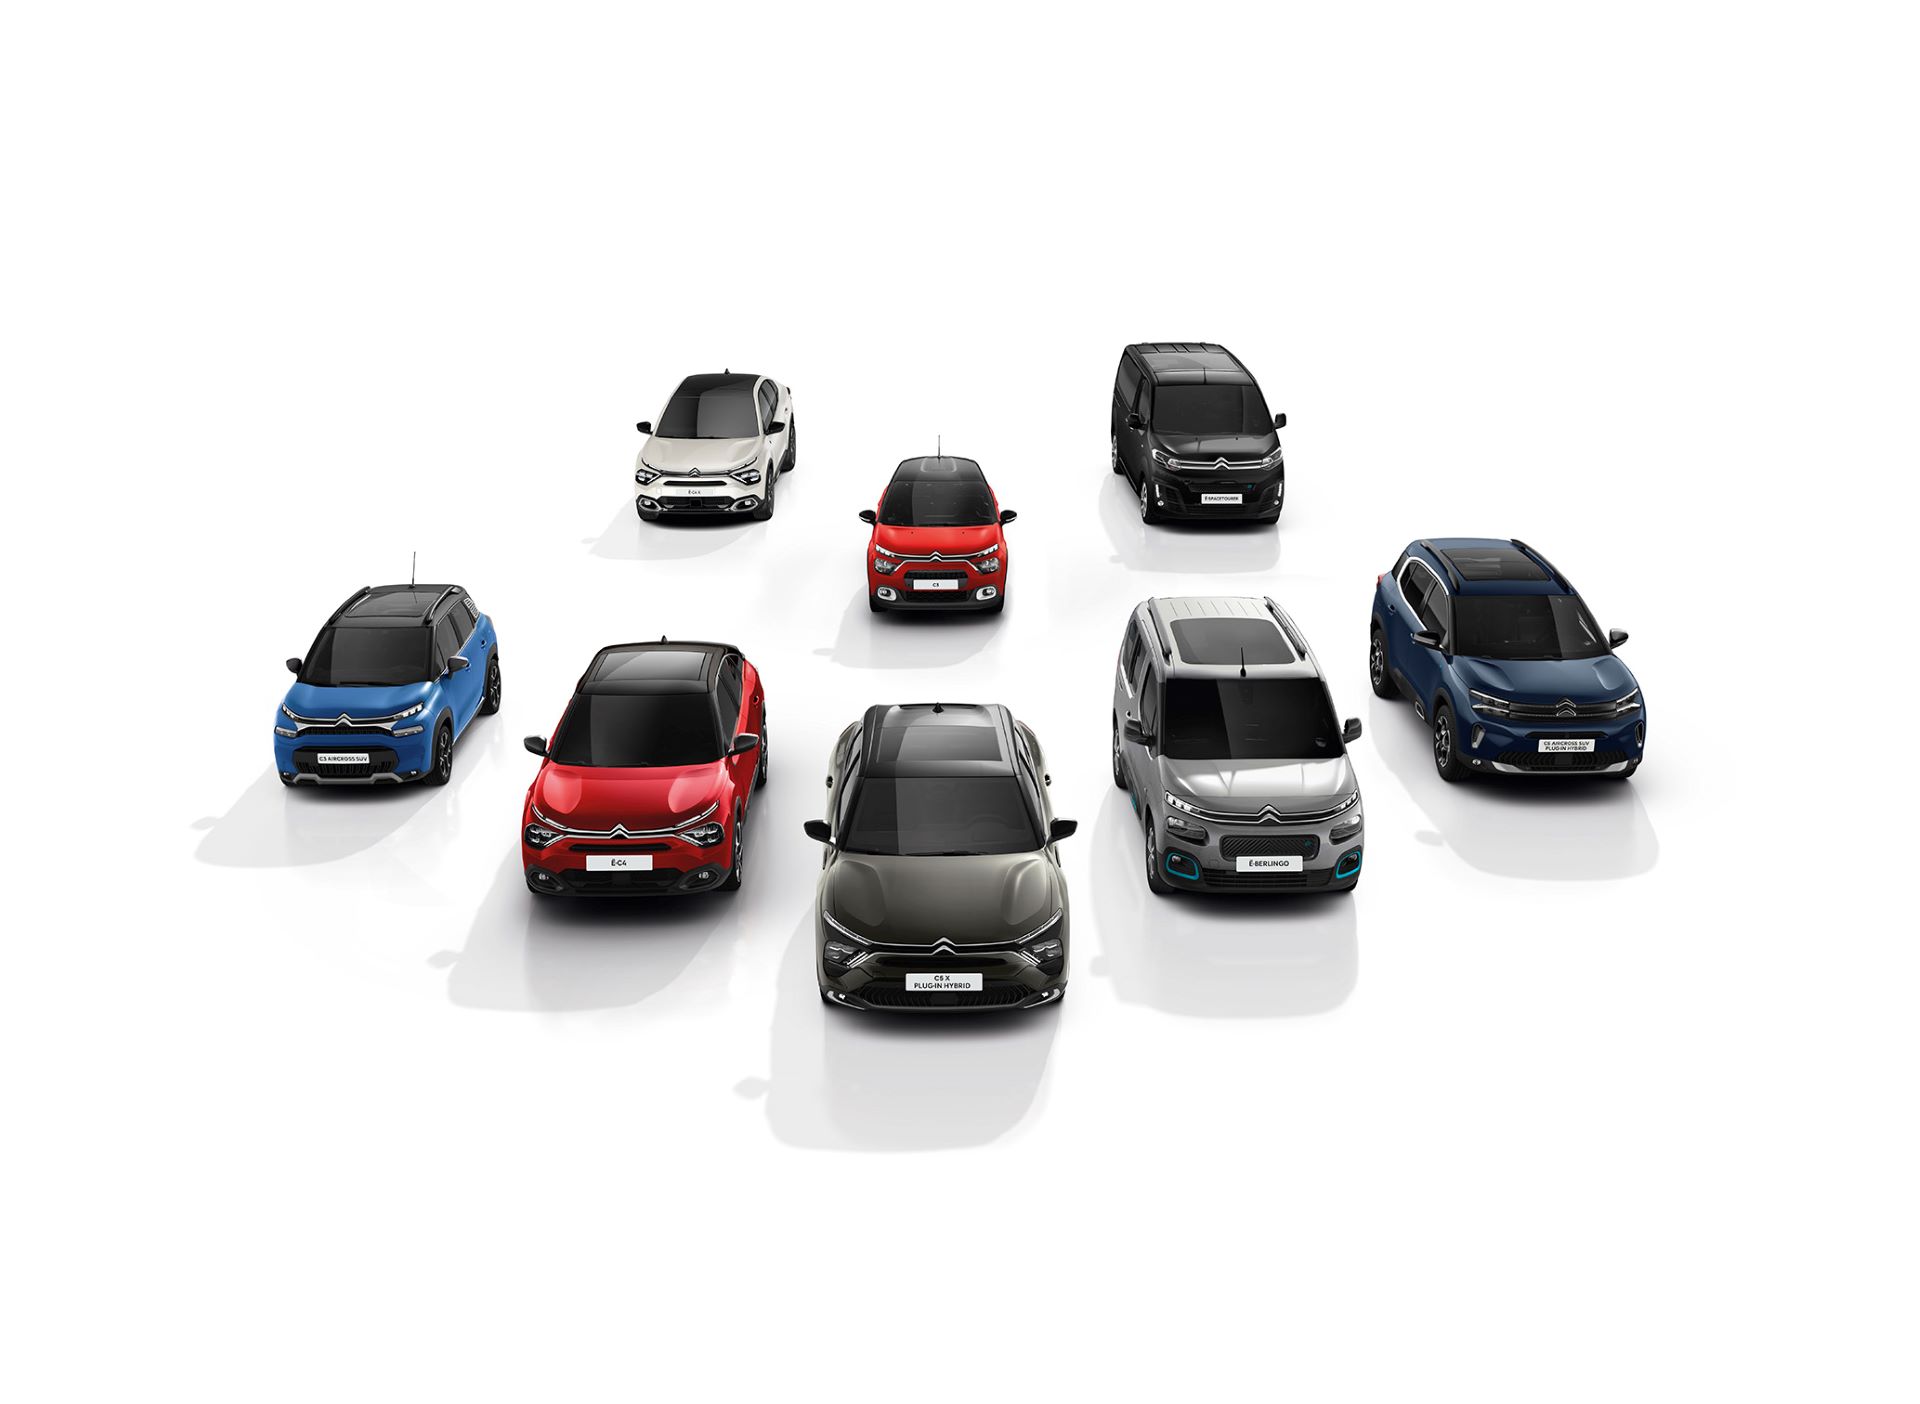 Citroen Redefines Its Range For An Easier Purchasing Process And Better Customer Experience